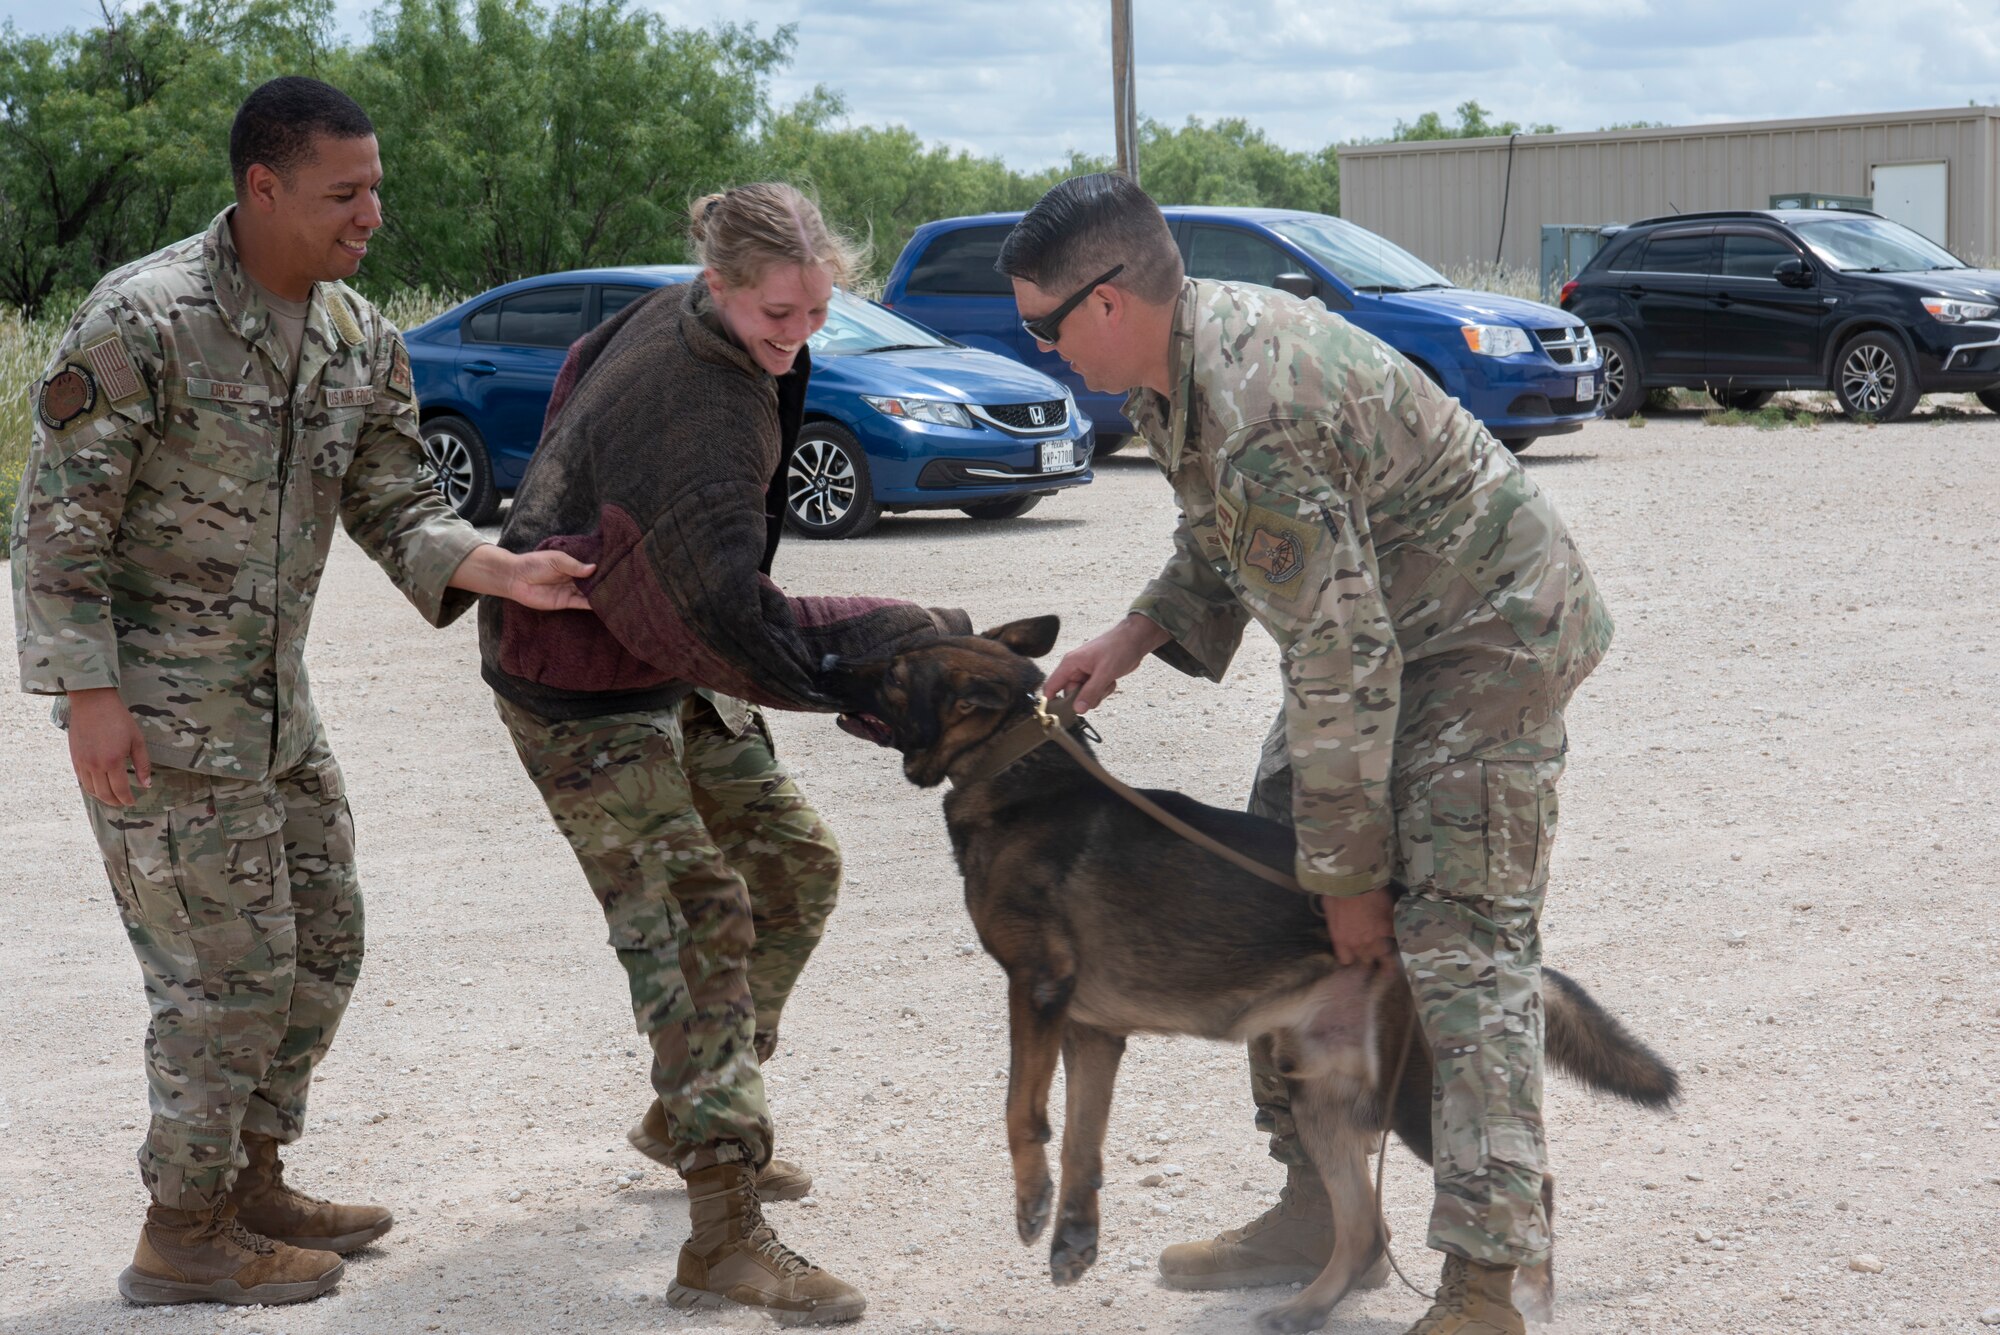 Airmen from the 7th Security Forces Squadron perform a military working dog demonstration during an Air Force cadet tour at Dyess Air Force Base, Texas, June 30, 2023. Dyess hosted groups of Academy and Air Force ROTC cadets in a program that offered prospective officers the opportunity to learn about the base mission and career fields they may be interested in. The cadets toured 14 units around the base like security forces, logistics, medical, flightline operations and civil engineering. (U.S. Air Force photo by Airman 1st Class Alondra Cristobal Hernandez)